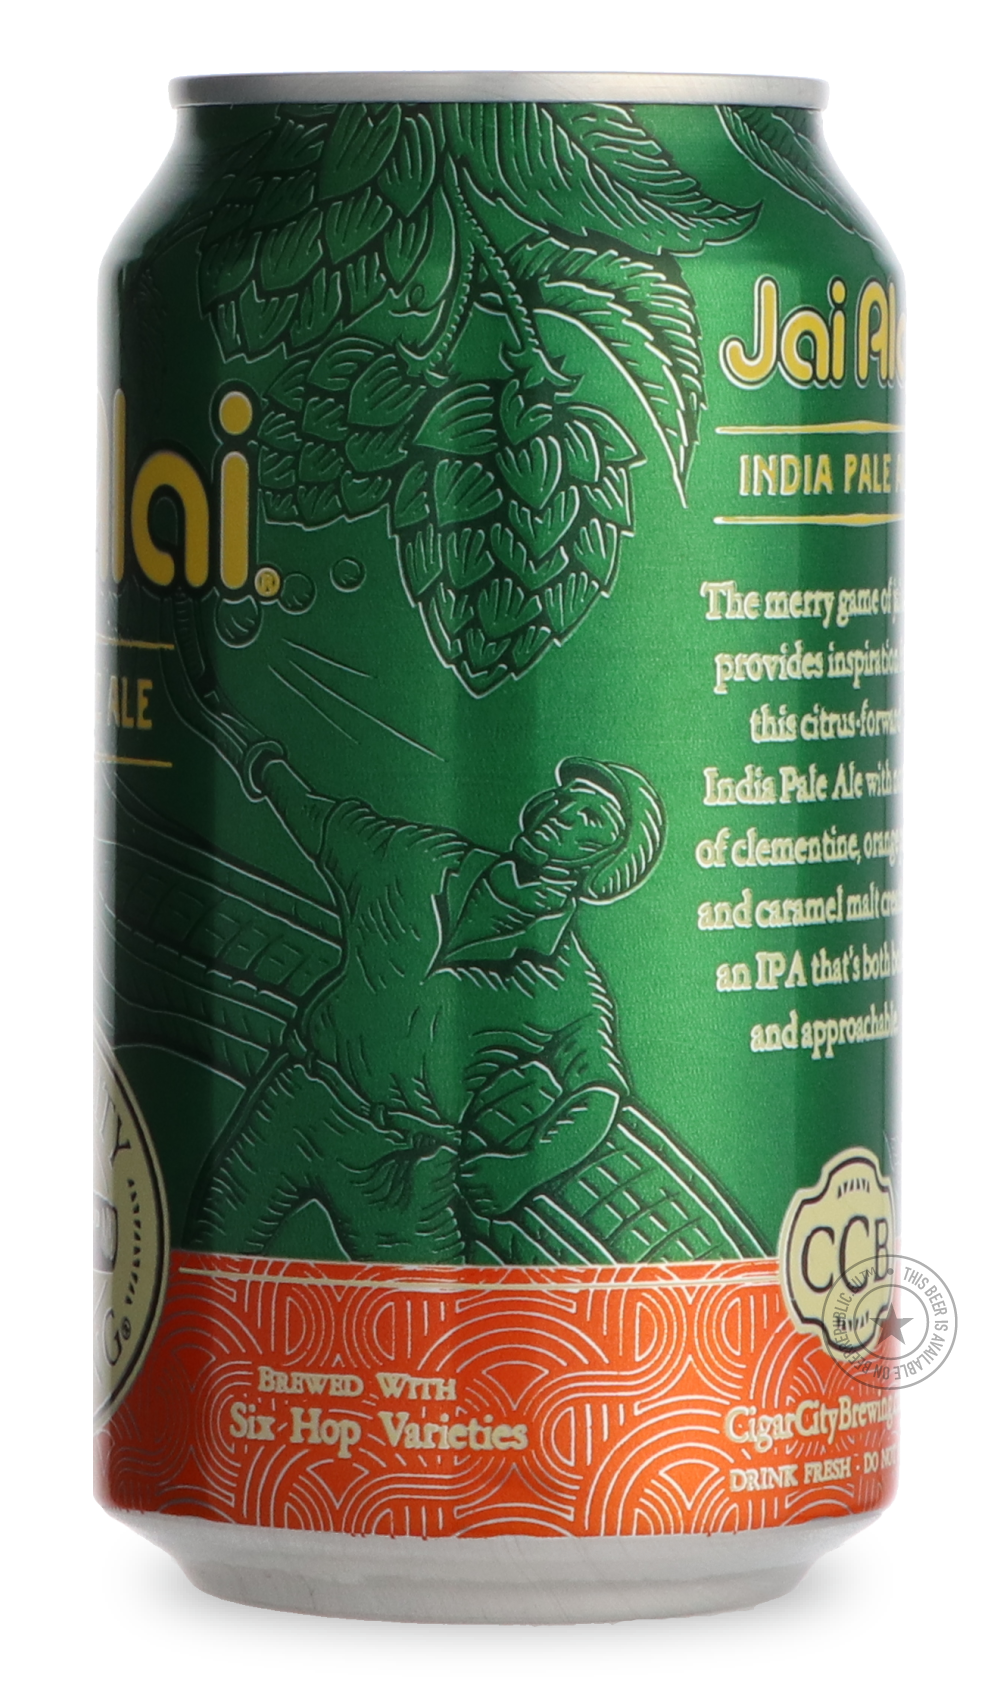 -Cigar City- Jai Alai®-IPA- Only @ Beer Republic - The best online beer store for American & Canadian craft beer - Buy beer online from the USA and Canada - Bier online kopen - Amerikaans bier kopen - Craft beer store - Craft beer kopen - Amerikanisch bier kaufen - Bier online kaufen - Acheter biere online - IPA - Stout - Porter - New England IPA - Hazy IPA - Imperial Stout - Barrel Aged - Barrel Aged Imperial Stout - Brown - Dark beer - Blond - Blonde - Pilsner - Lager - Wheat - Weizen - Amber - Barley Win